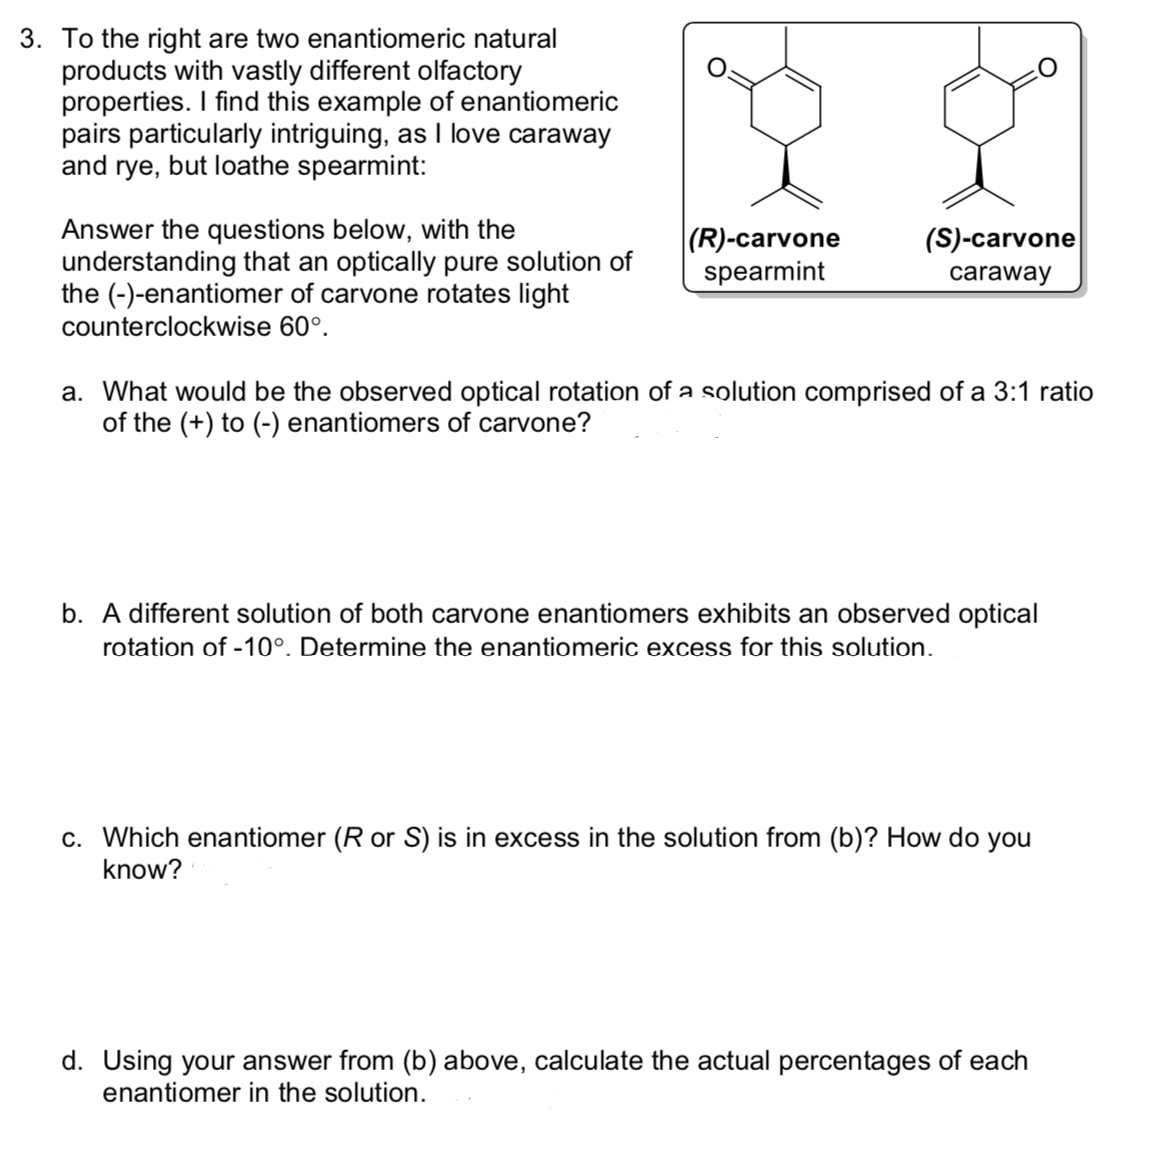 3. To the right are two enantiomeric natural
products with vastly different olfactory
properties. I find this example of enantiomeric
pairs particularly intriguing, as I love caraway
and rye, but loathe spearmint:
Answer the questions below, with the
understanding that an optically pure solution of
the (-)-enantiomer of carvone rotates light
counterclockwise 60°.
|(R)-carvone
spearmint
(S)-carvone
caraway
a. What would be the observed optical rotation of a solution comprised of a 3:1 ratio
of the (+) to (-) enantiomers of carvone?
b. A different solution of both carvone enantiomers exhibits an observed optical
rotation of -10°. Determine the enantiomeric excess for this solution.
c. Which enantiomer (R or S) is in excess in the solution from (b)? How do you
know?
d. Using your answer from (b) above, calculate the actual percentages of each
enantiomer in the solution.
